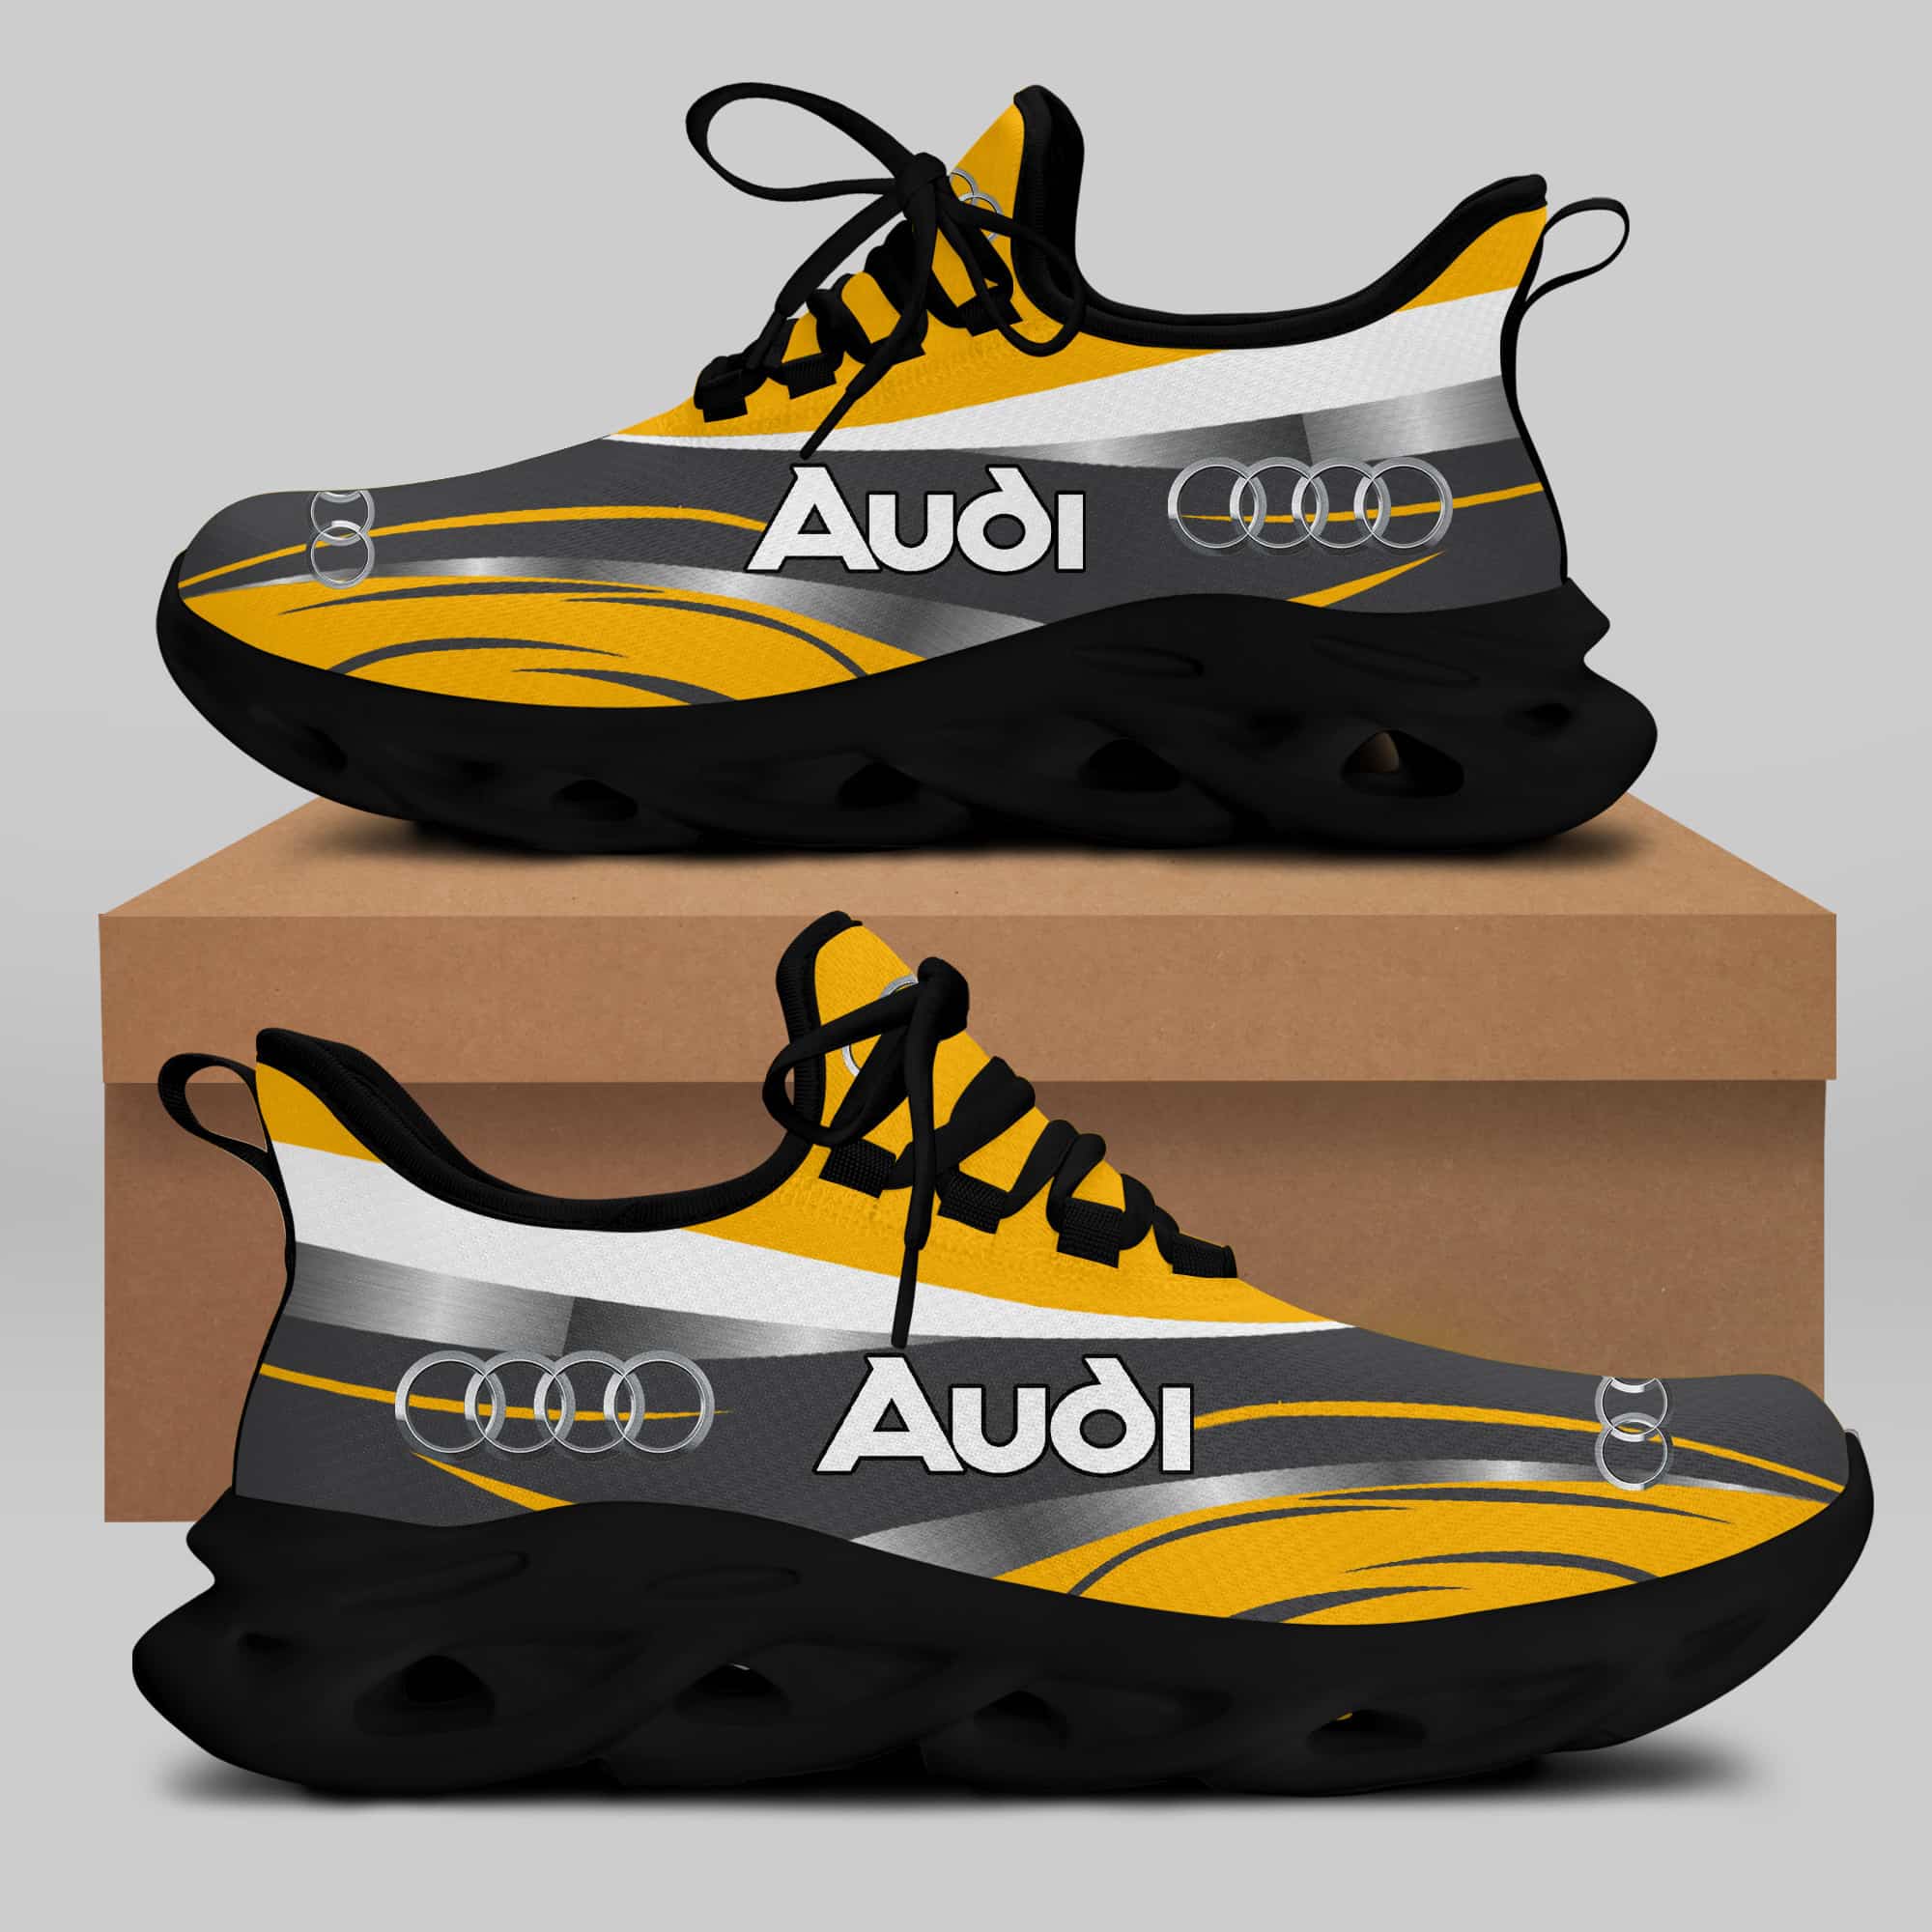 Audi Sport Running Shoes Max Soul Shoes Sneakers Ver 54 1